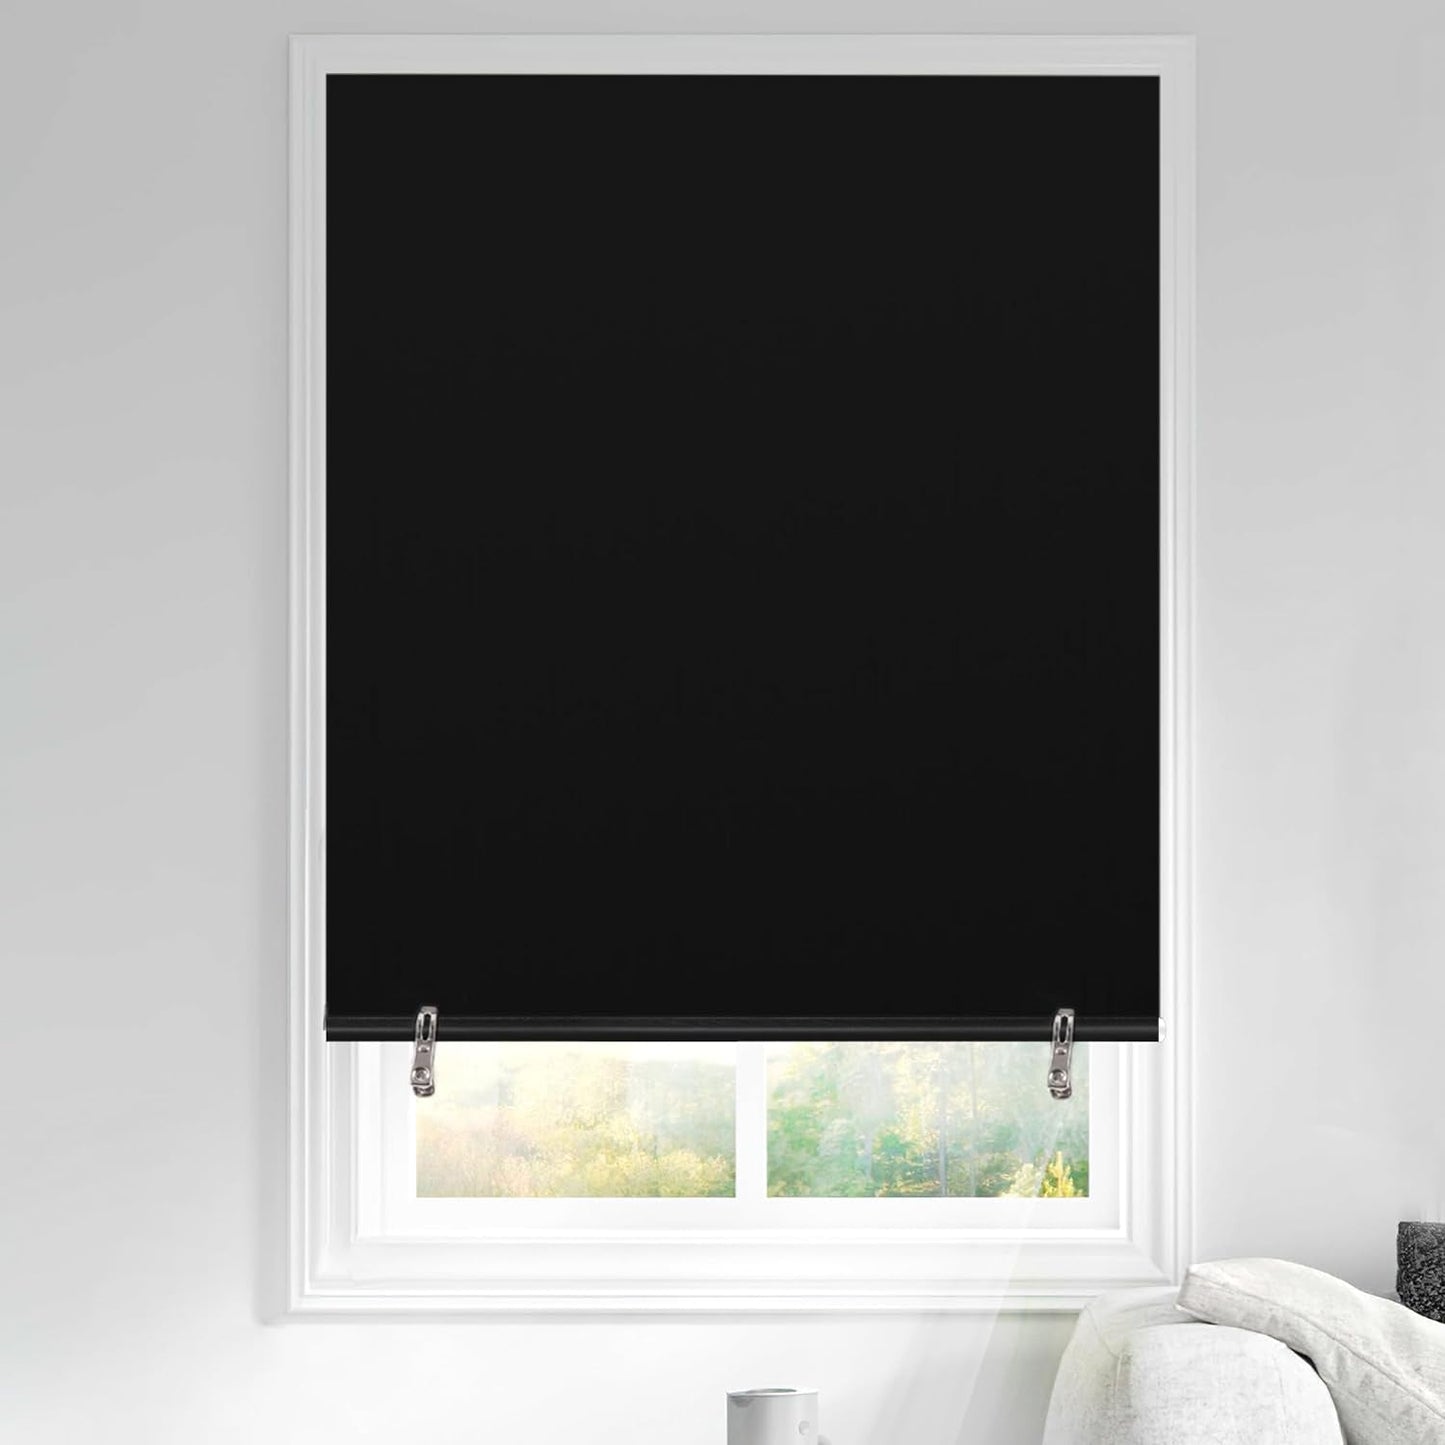 Blackout Curtains for Bedroom, 100% Black Out Window Cover Film Blinds Screen Portable Self-Adhesive Travel RV Nursery Temporary Blackout, 57" X 72"